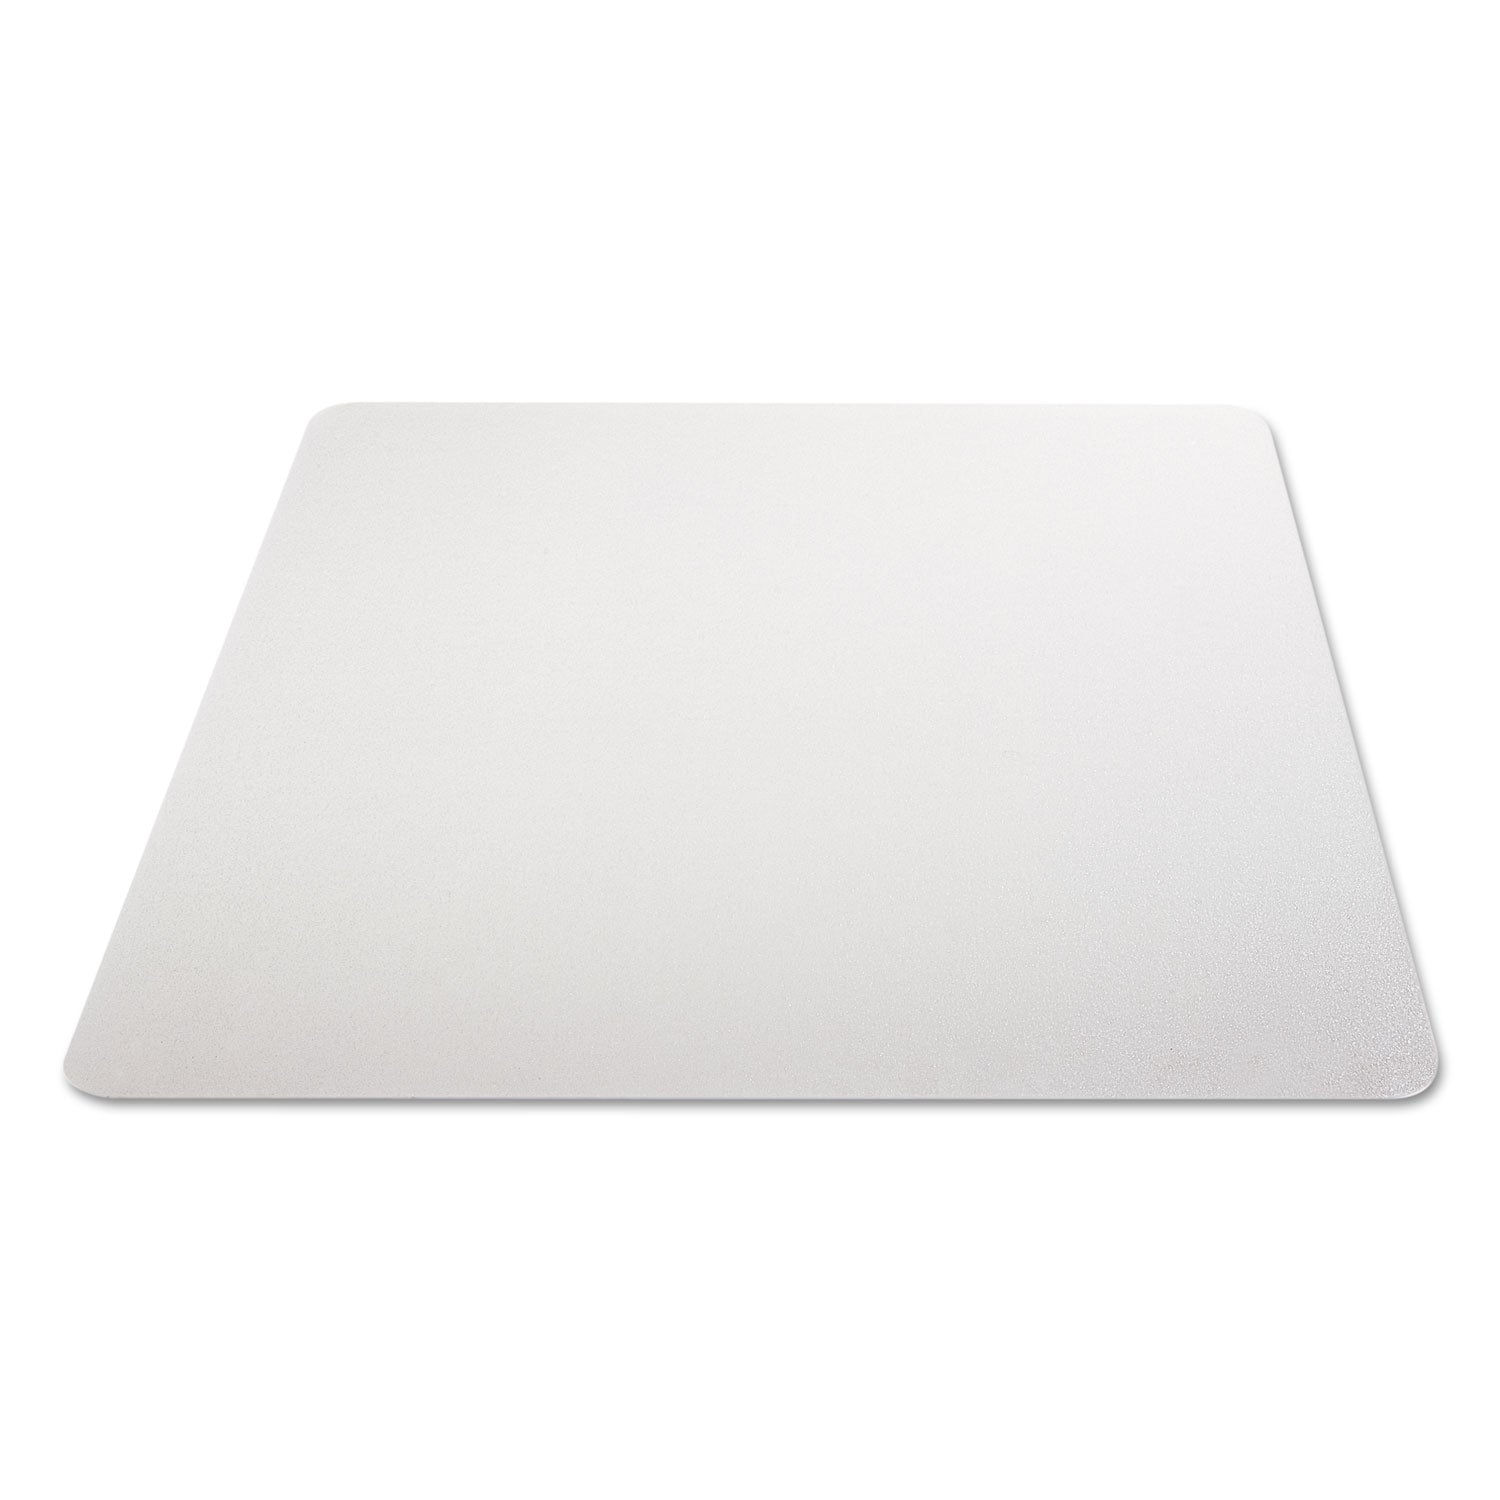 All Day Use Chair Mat - Hard Floors, 45 x 53, Rectangle, Clear - 